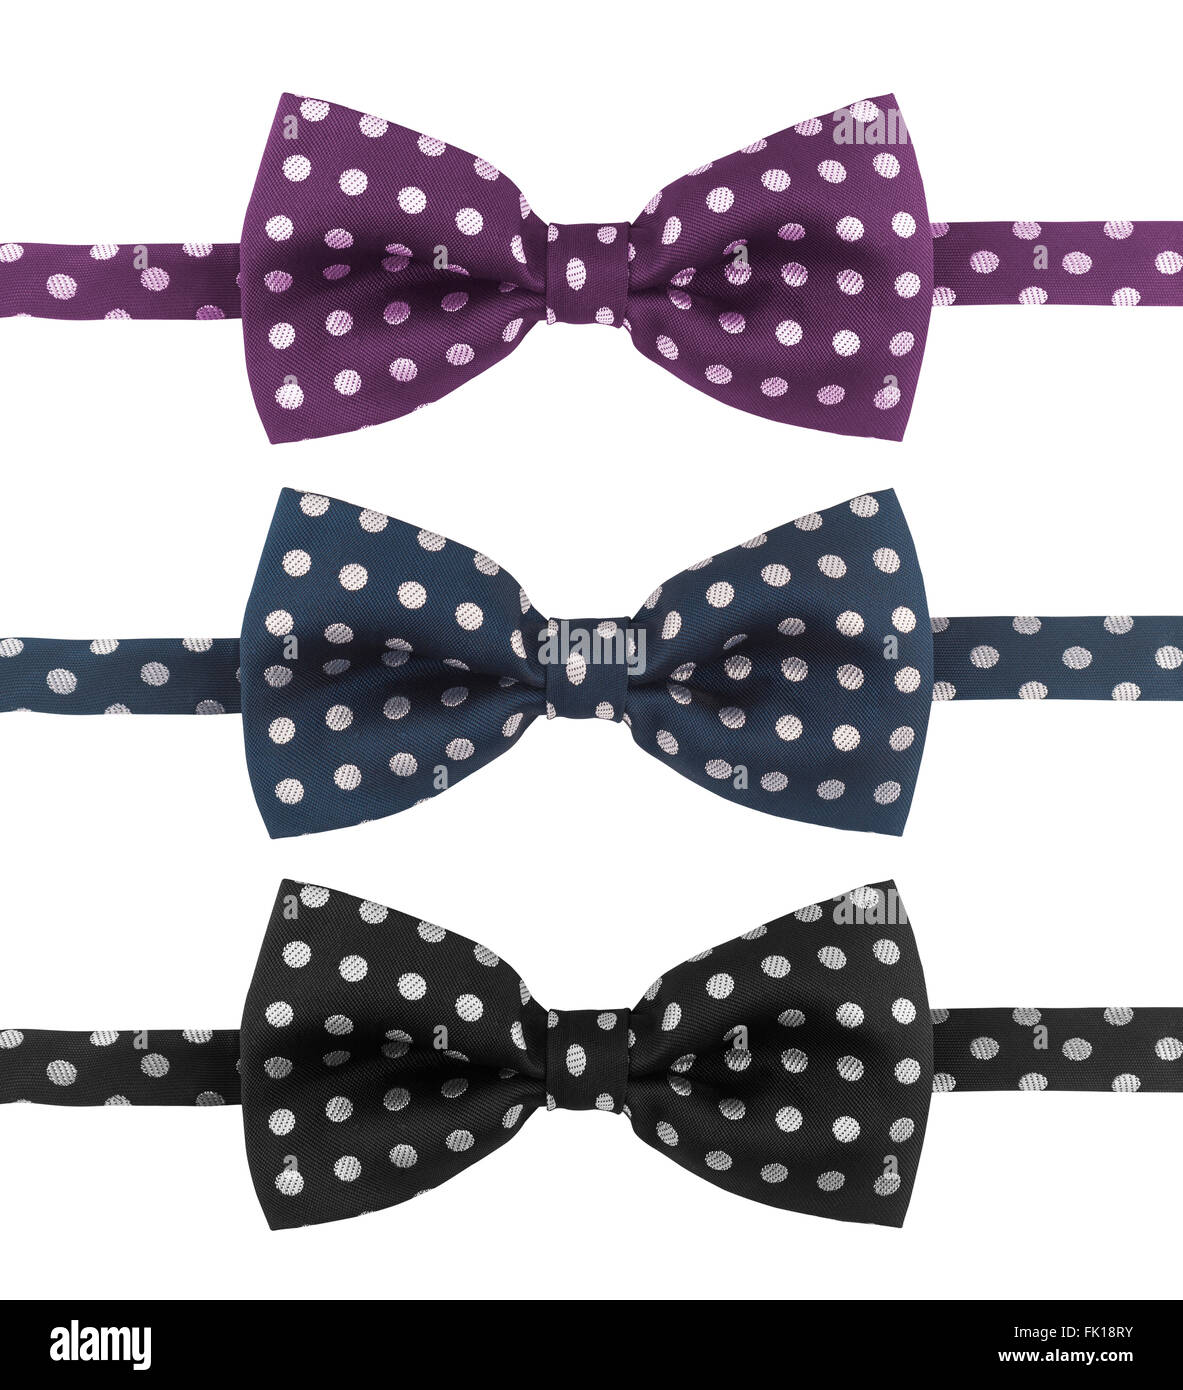 Three dotted tie bows in different colors isolated on white background Stock Photo